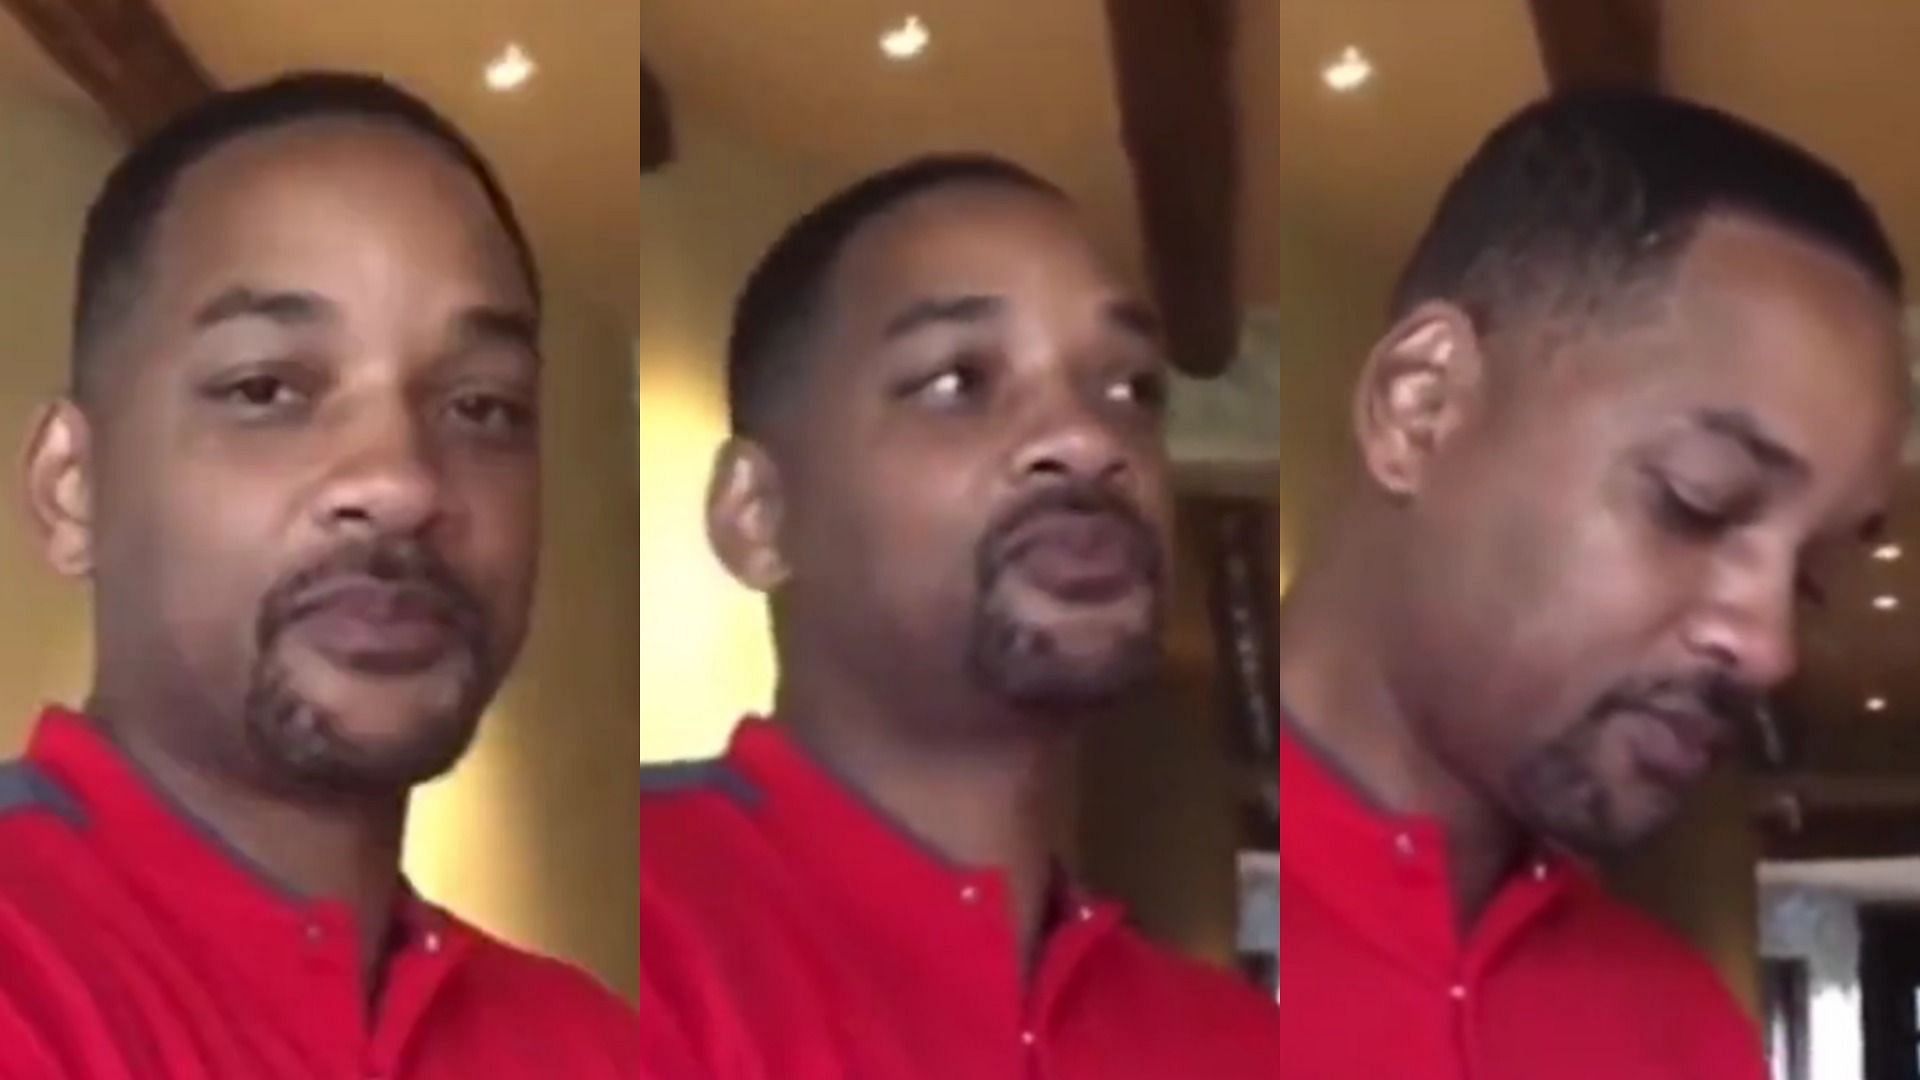 Video of Will Smith pleading with his wife goes viral on social media (Image via Twitter/swxxtsande)